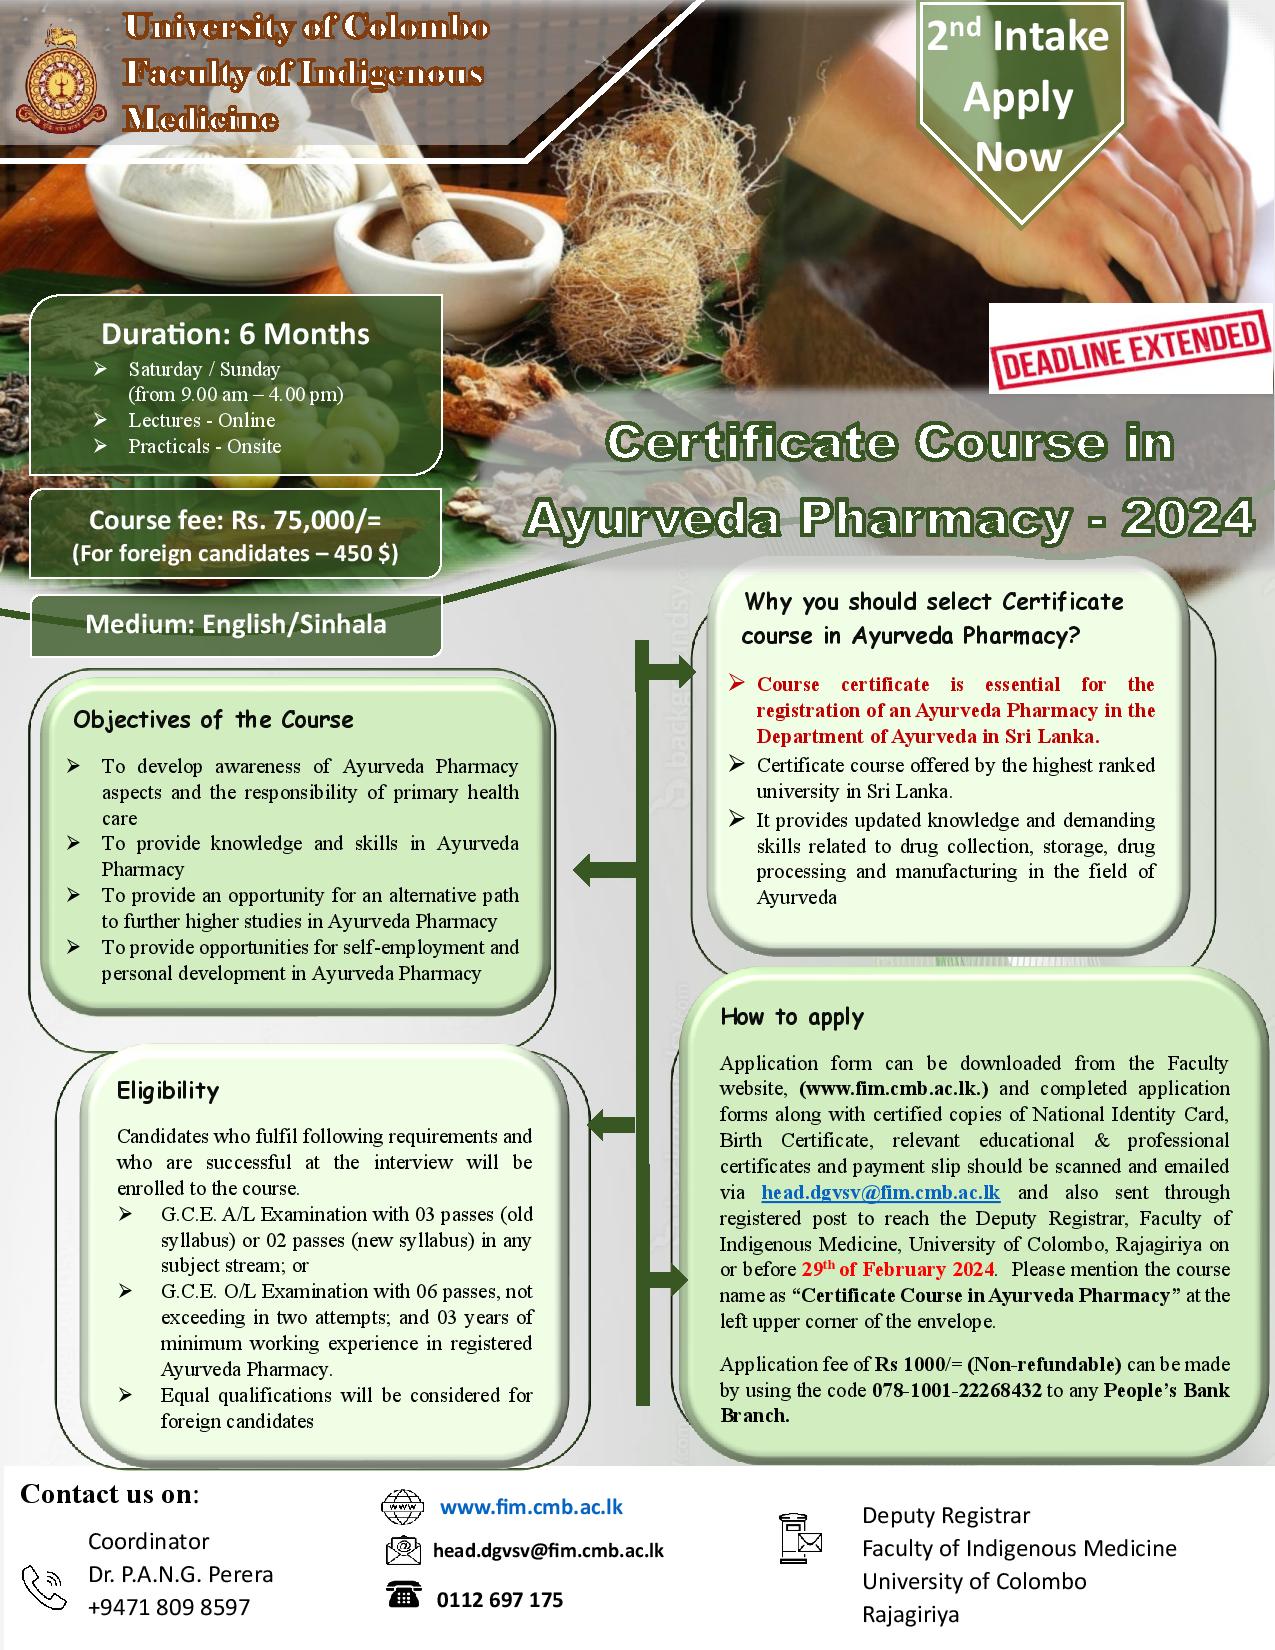 Deadline Extended : Certificate Course in Ayurveda Pharmacy